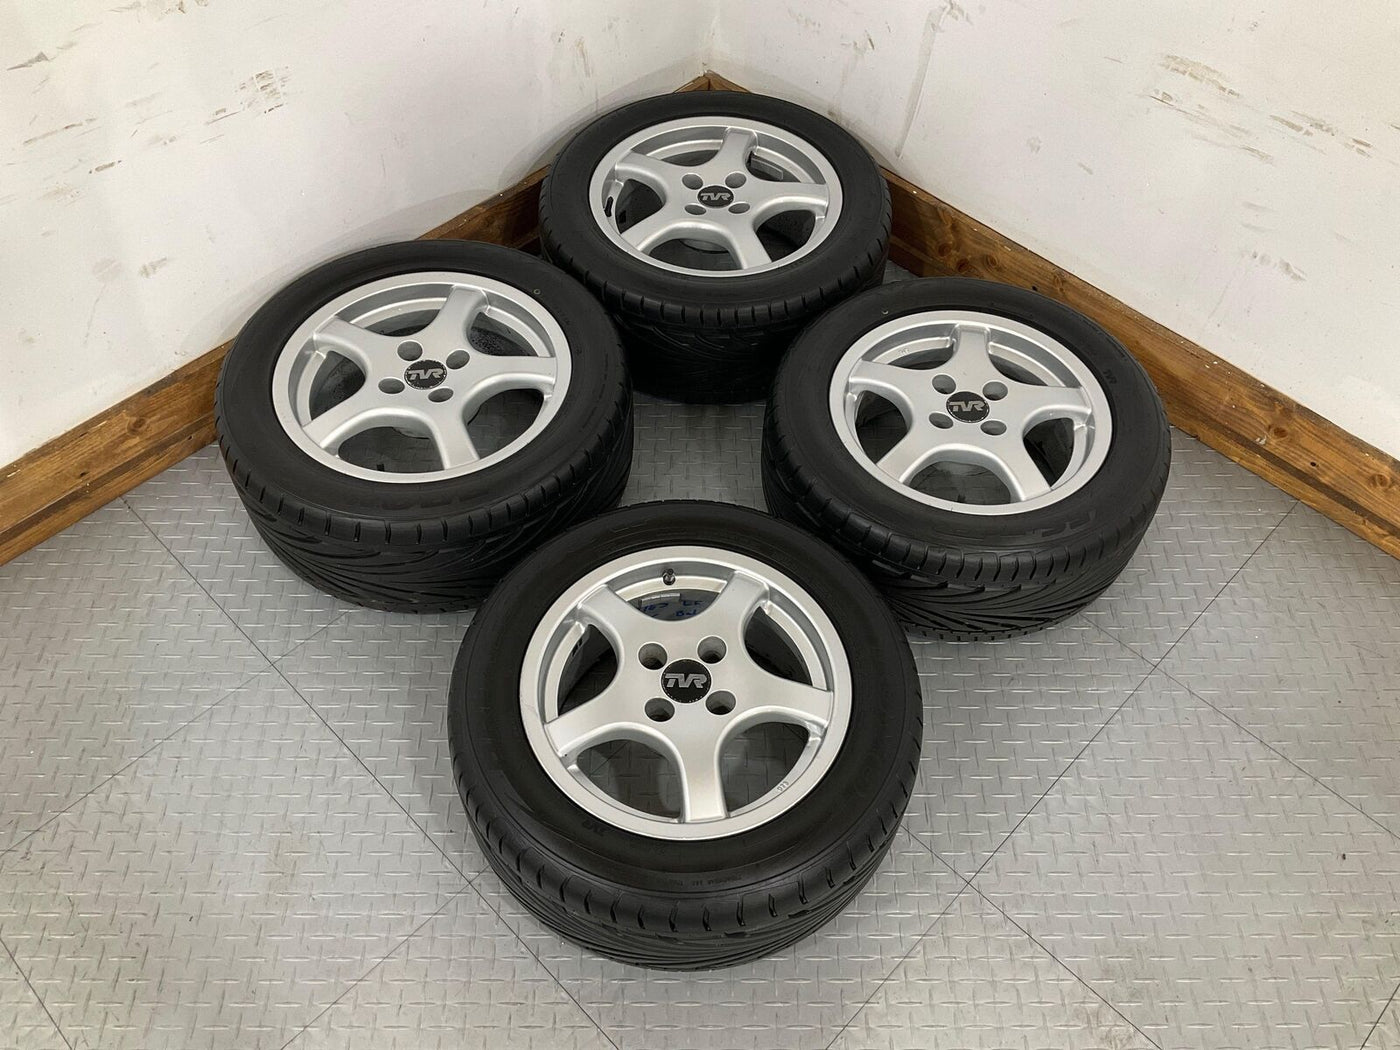 TVR Chimaera Set of 4 15x7 & 16x7.5 Staggered Wheels W/Toyo Tires 1 Rear Is Bent